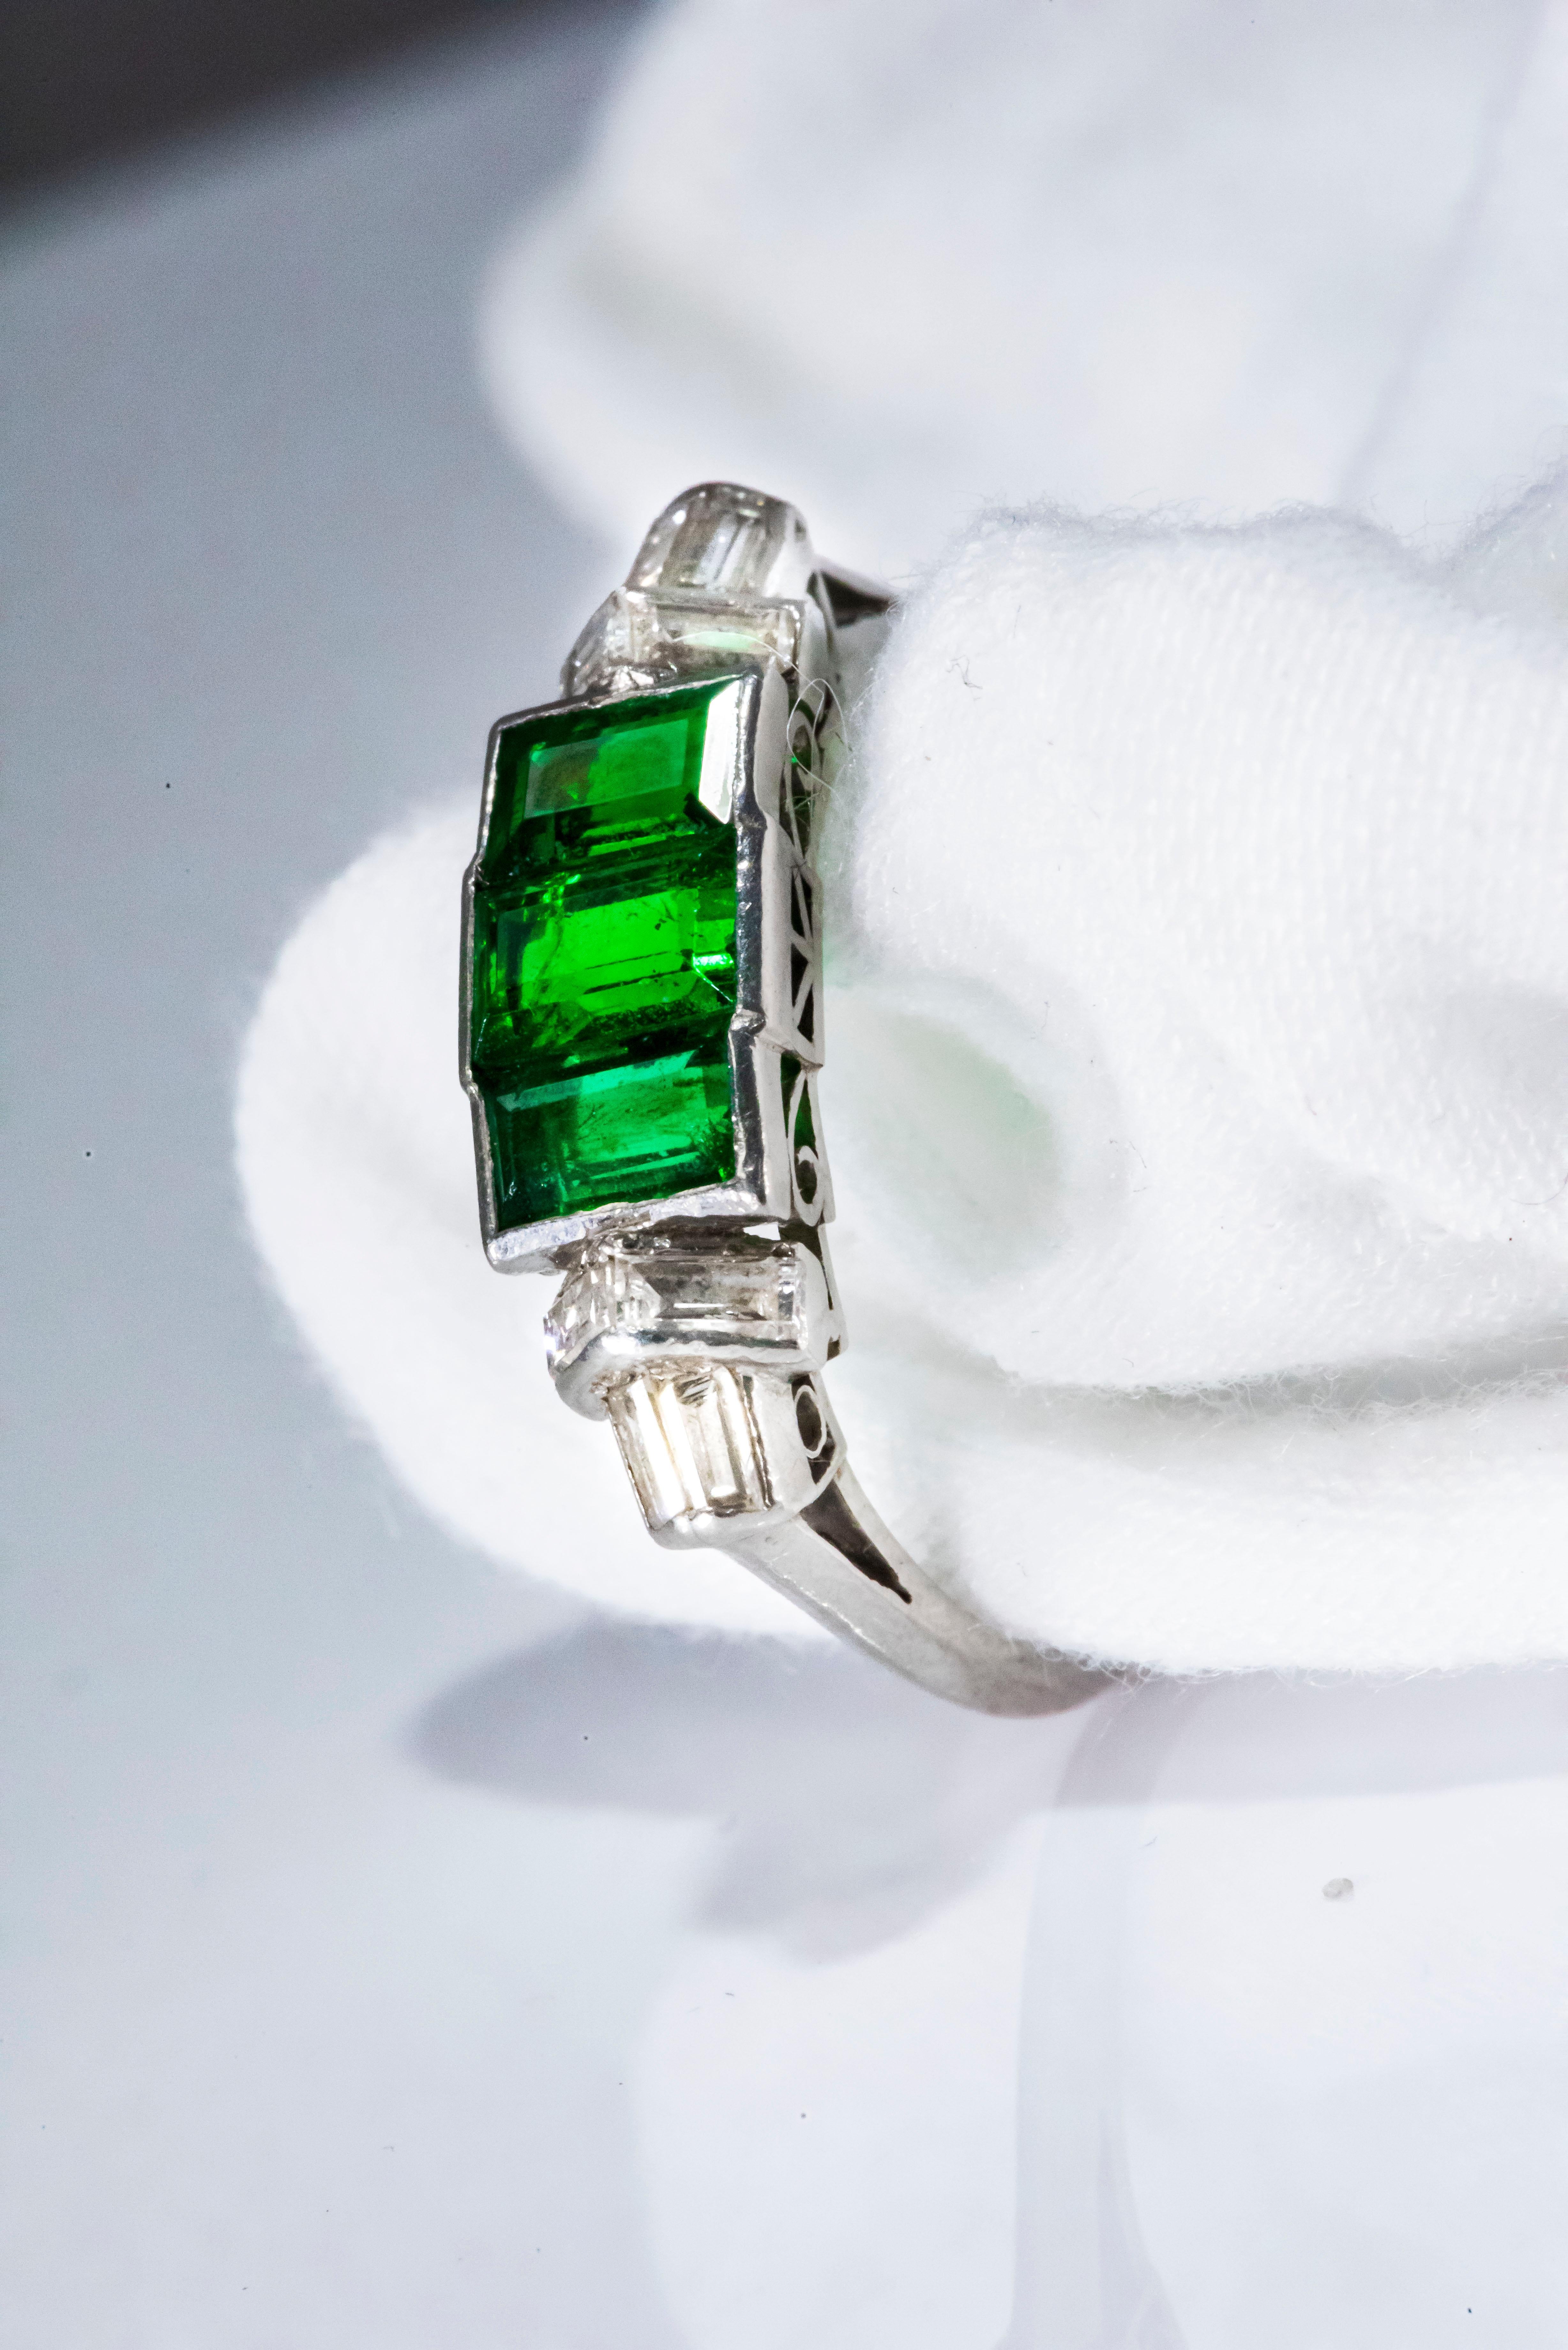 The present ring is a gorgeous example of an entirely emerald trilogy platinum ring from the 1920s. Elegant and sophisticated, this ring is entirely comprised of emerald cut stones with approximately 8 emerald cut diamonds flanking 3 larger vivid